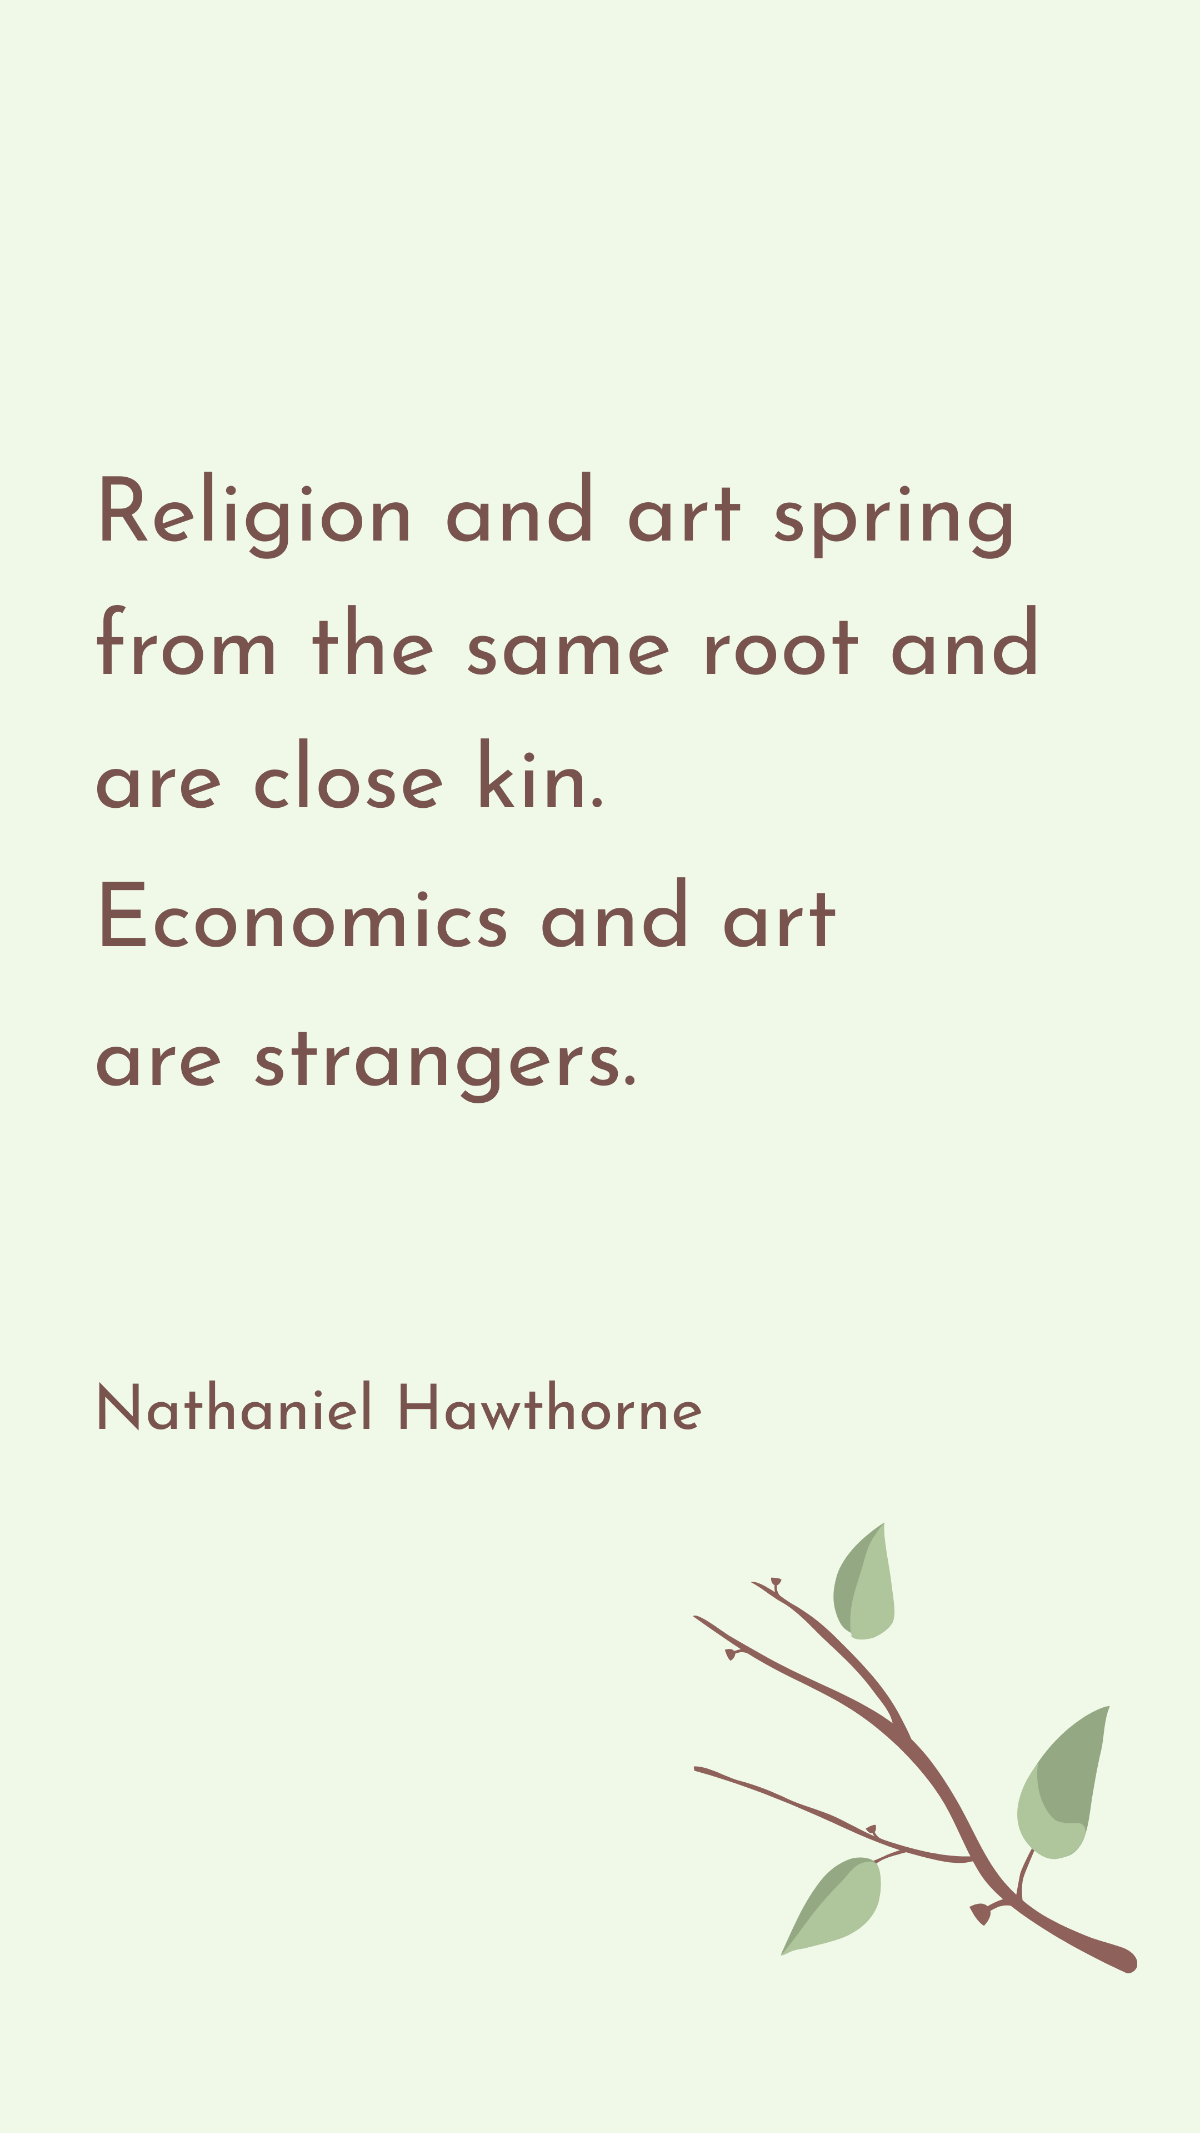 Nathaniel Hawthorne - Religion and art spring from the same root and are close kin. Economics and art are strangers. Template